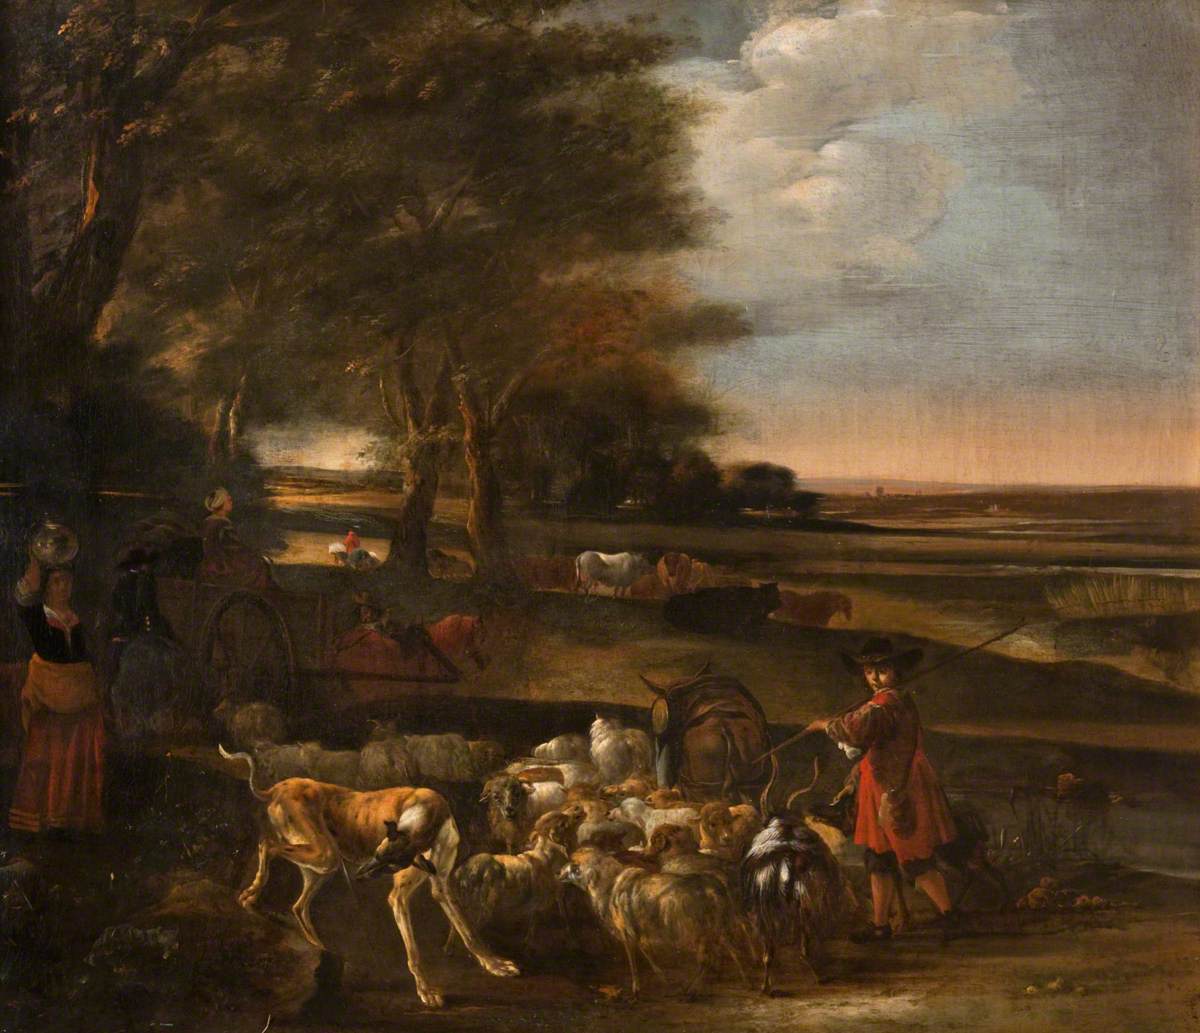 Landscape with Peasants and Animals